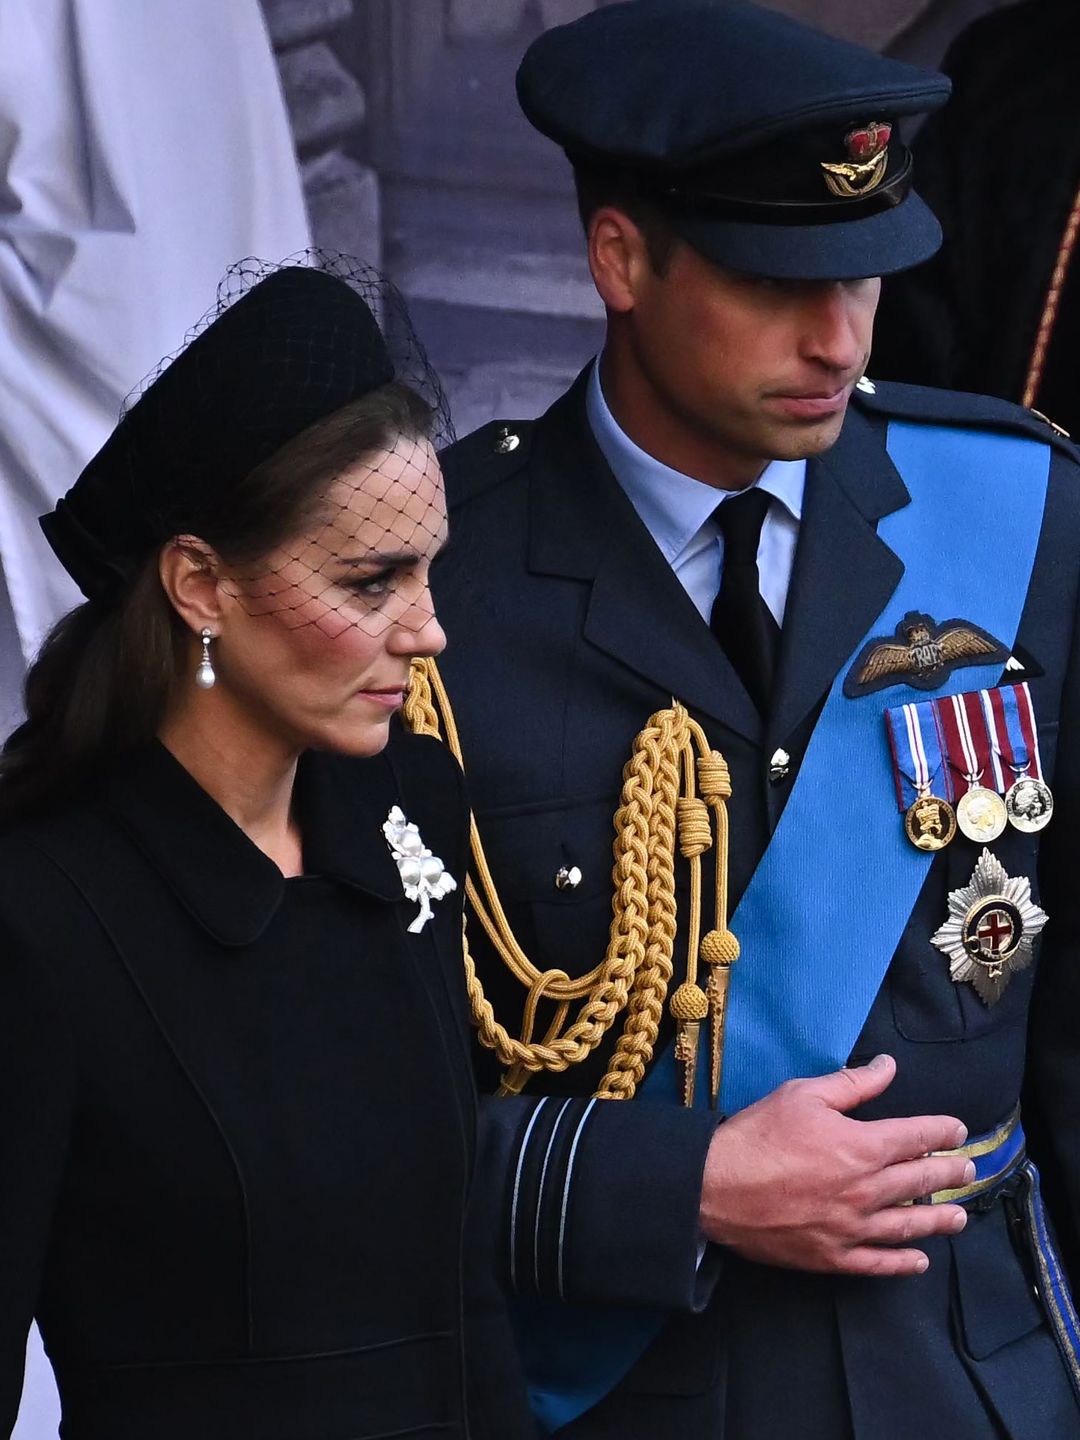 The Princess of Wales wore the poignant brooch to the latee Queen's funeral service   on September 14, 2022